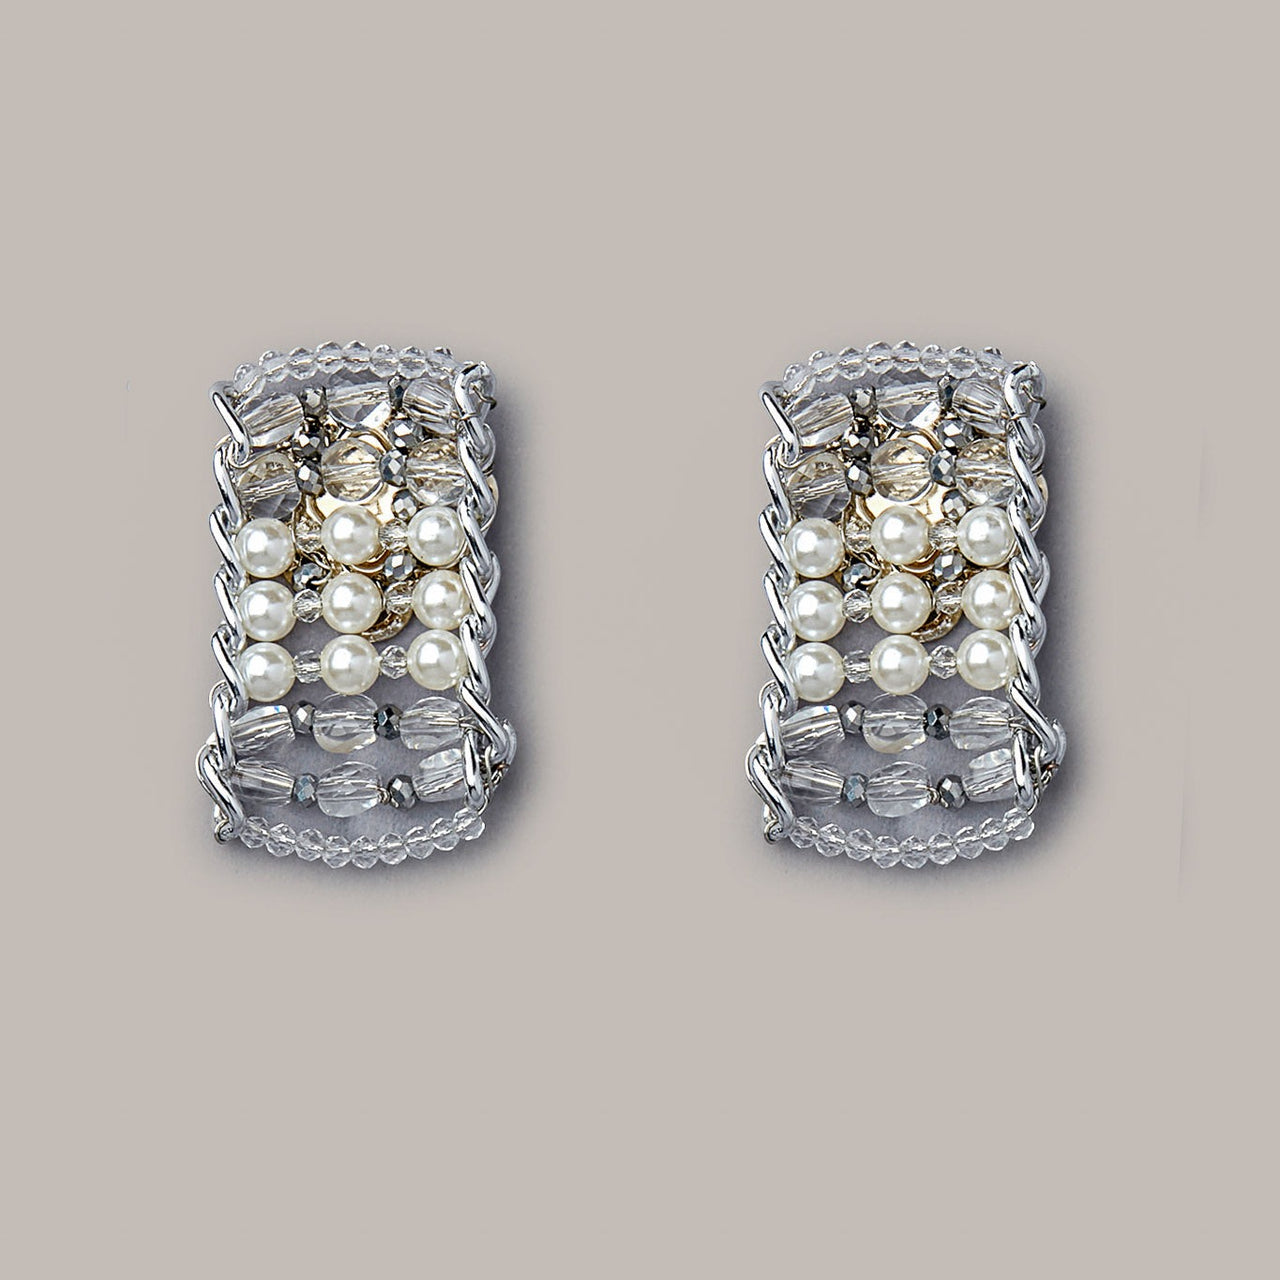 DORO - Metallic Silver Studs With Pearls And Crystals - Meraki Lifestyle Store